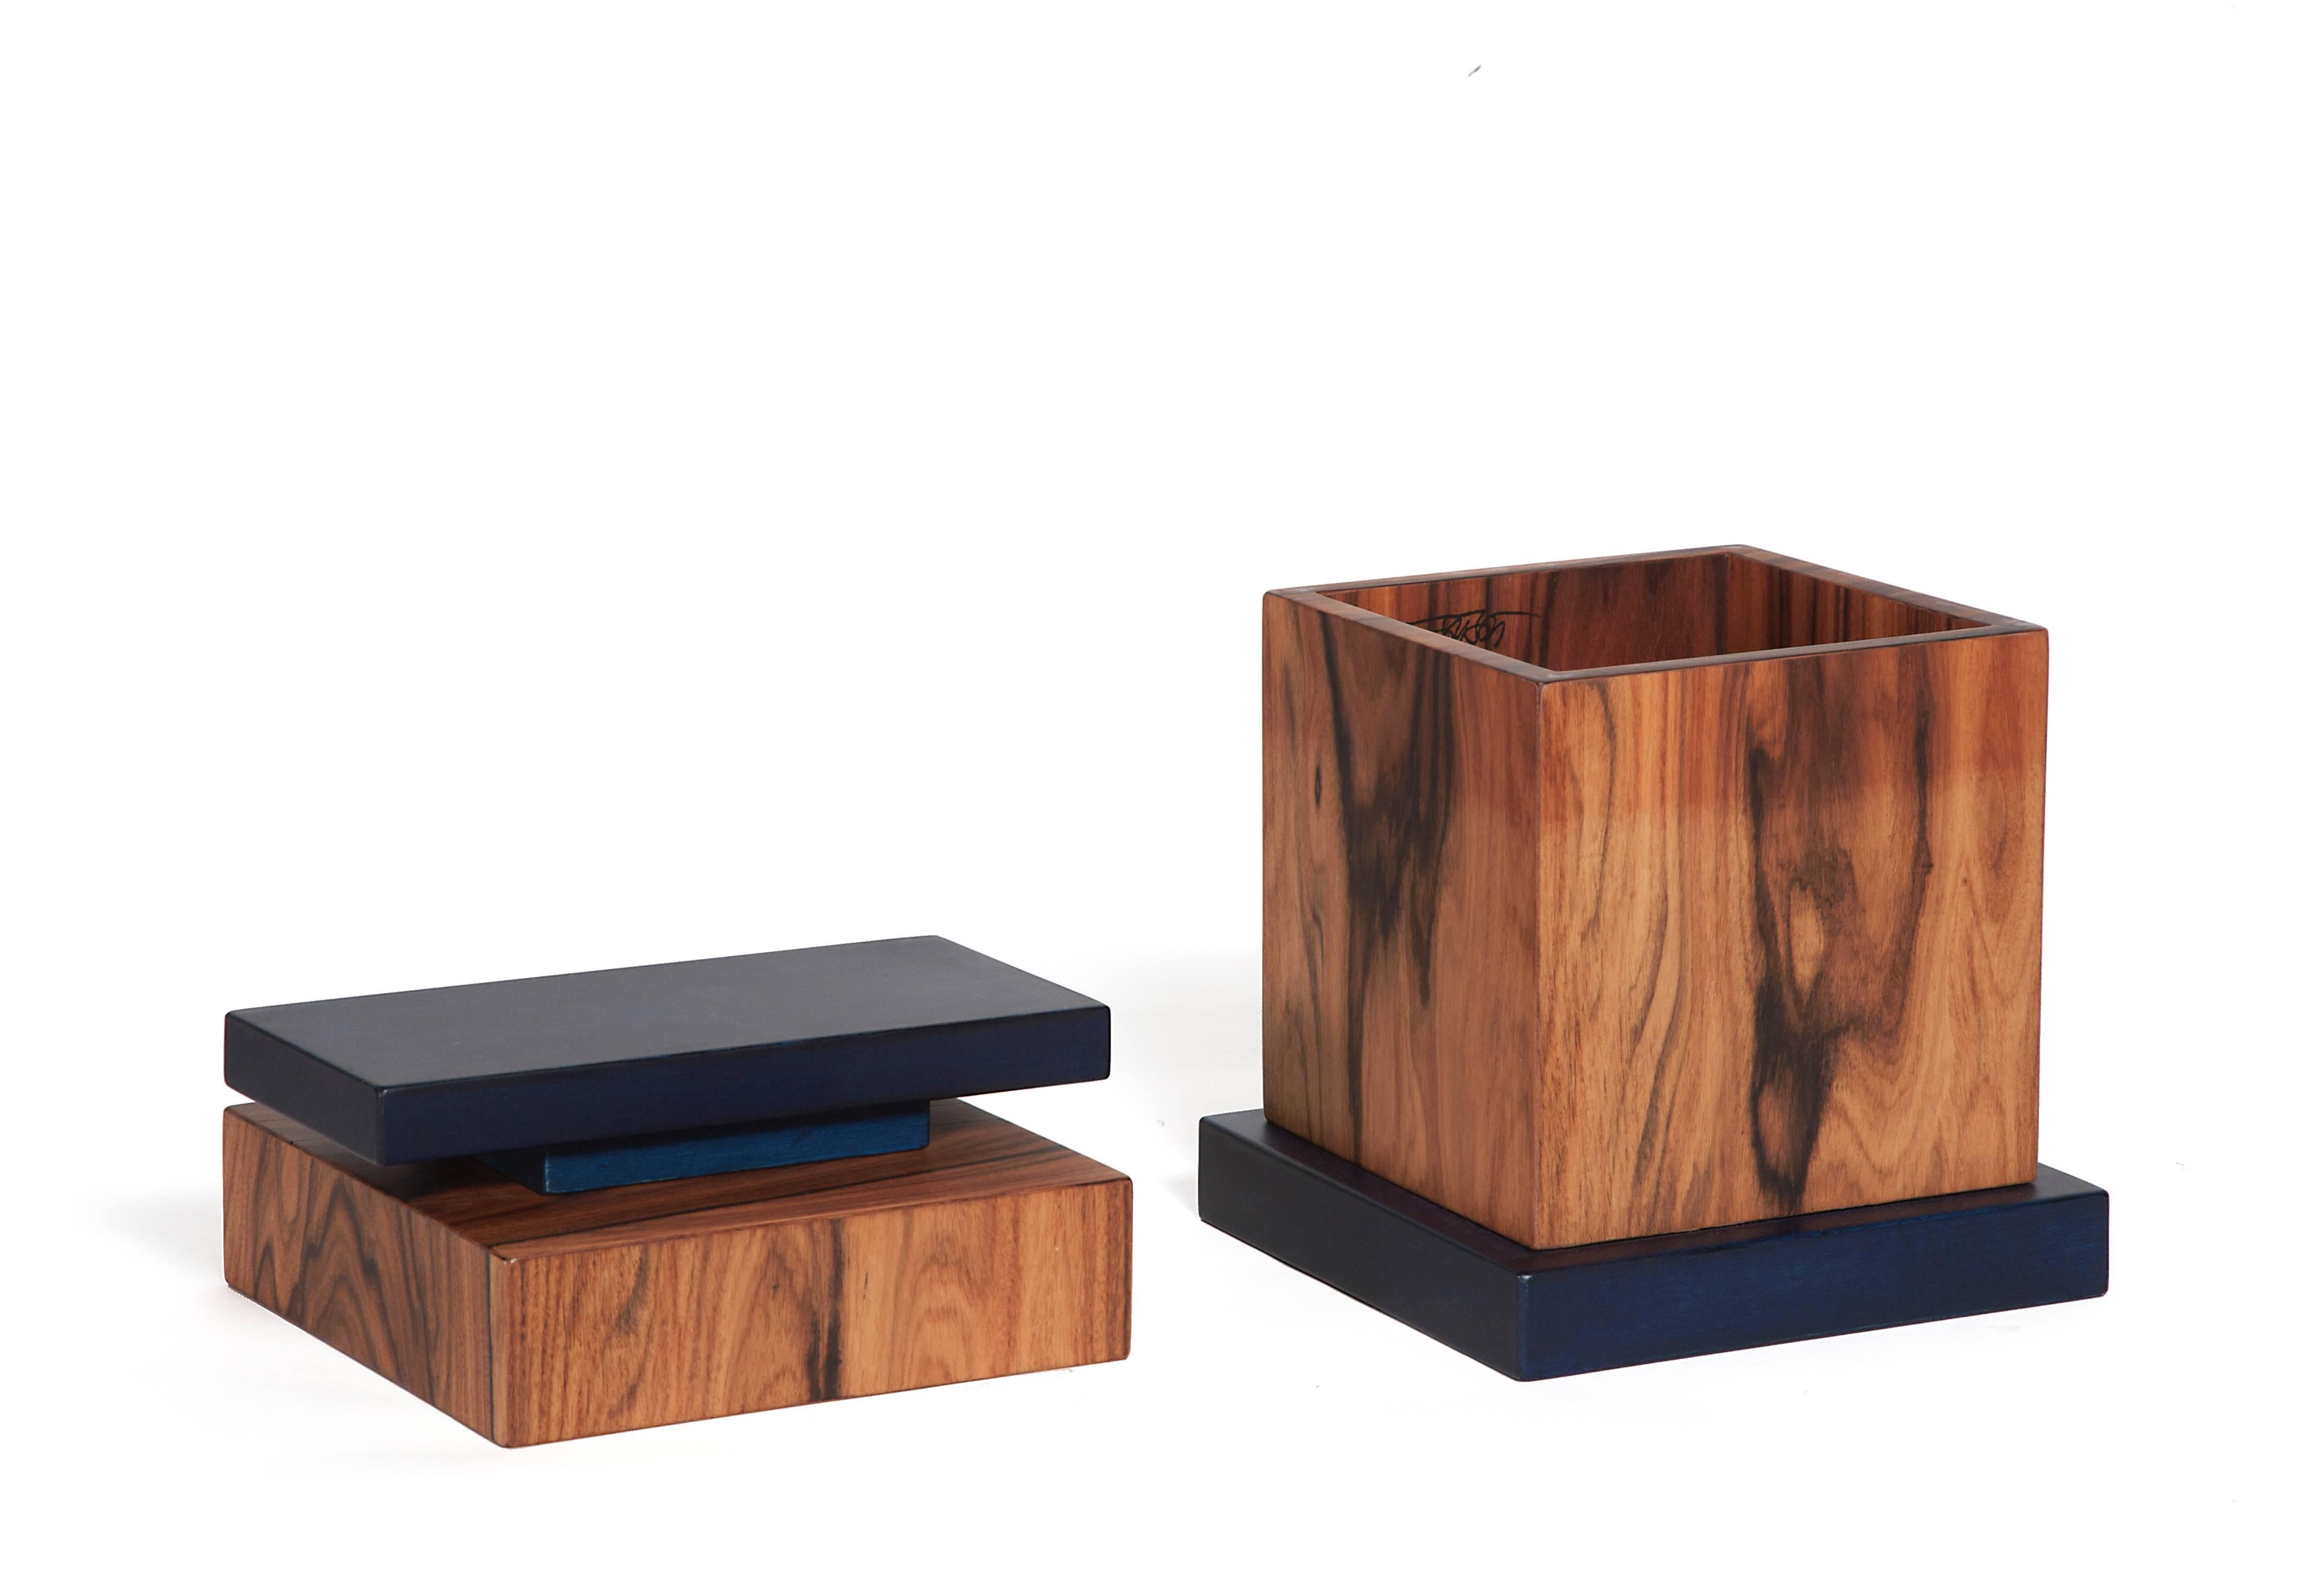 Plywood box of the series 'Scatole Segrete' (Secret Boxes).
Birch plywood structure covered with three layers of rosewood.
Knob and base in lime wood colored with blue aniline.
Produced in a limited edition of 99.